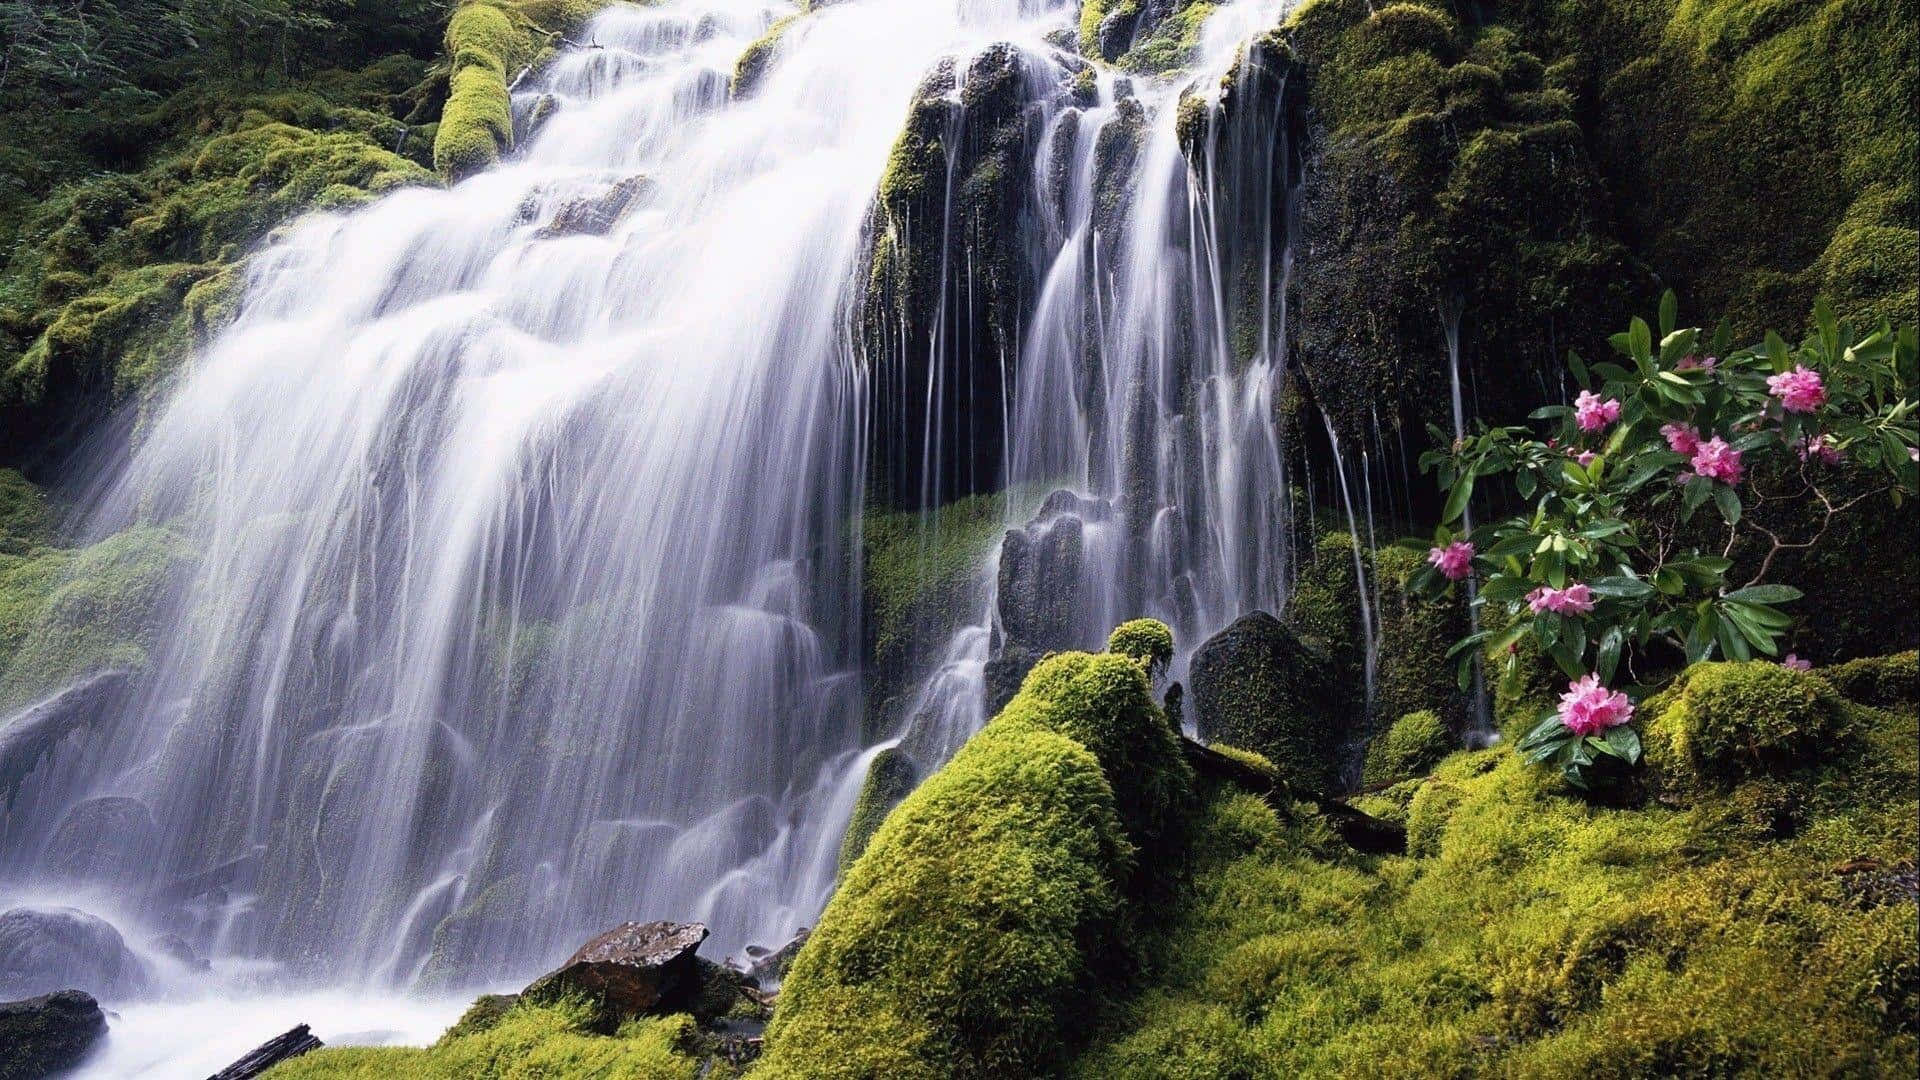 The Majestic Beauty of Nature In A Waterfall"